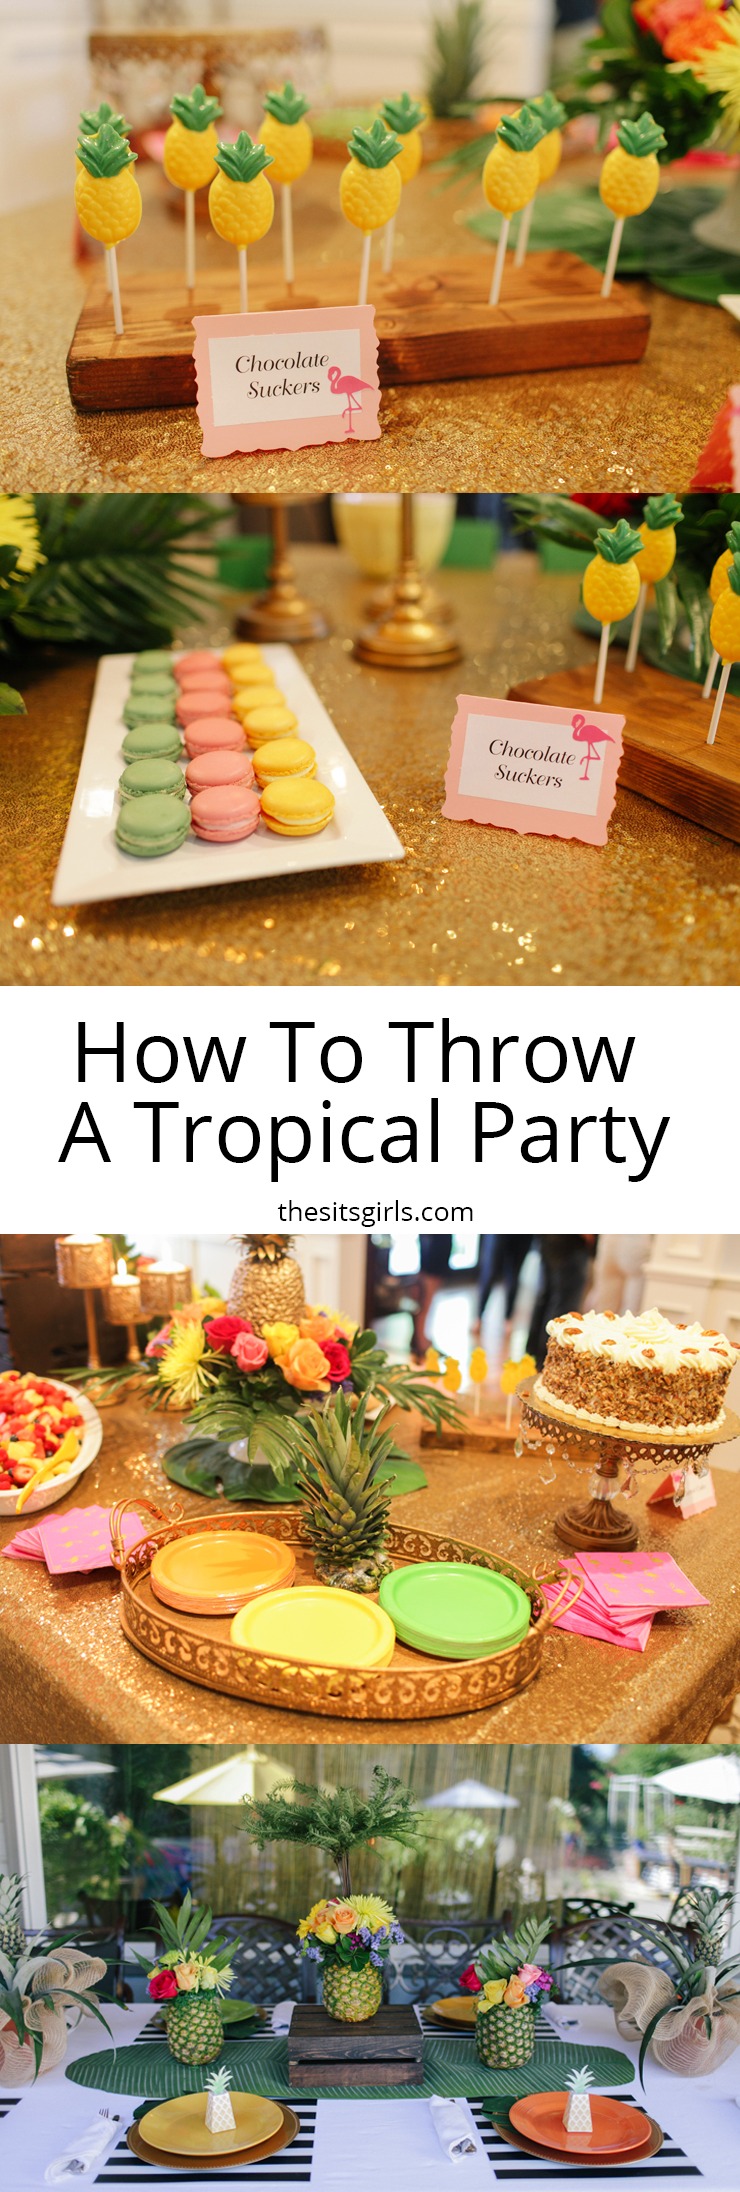 How to throw the perfect tropical party with delicious food and cute party decor. The flamingos and pineapple flower arrangements make it extra fun.